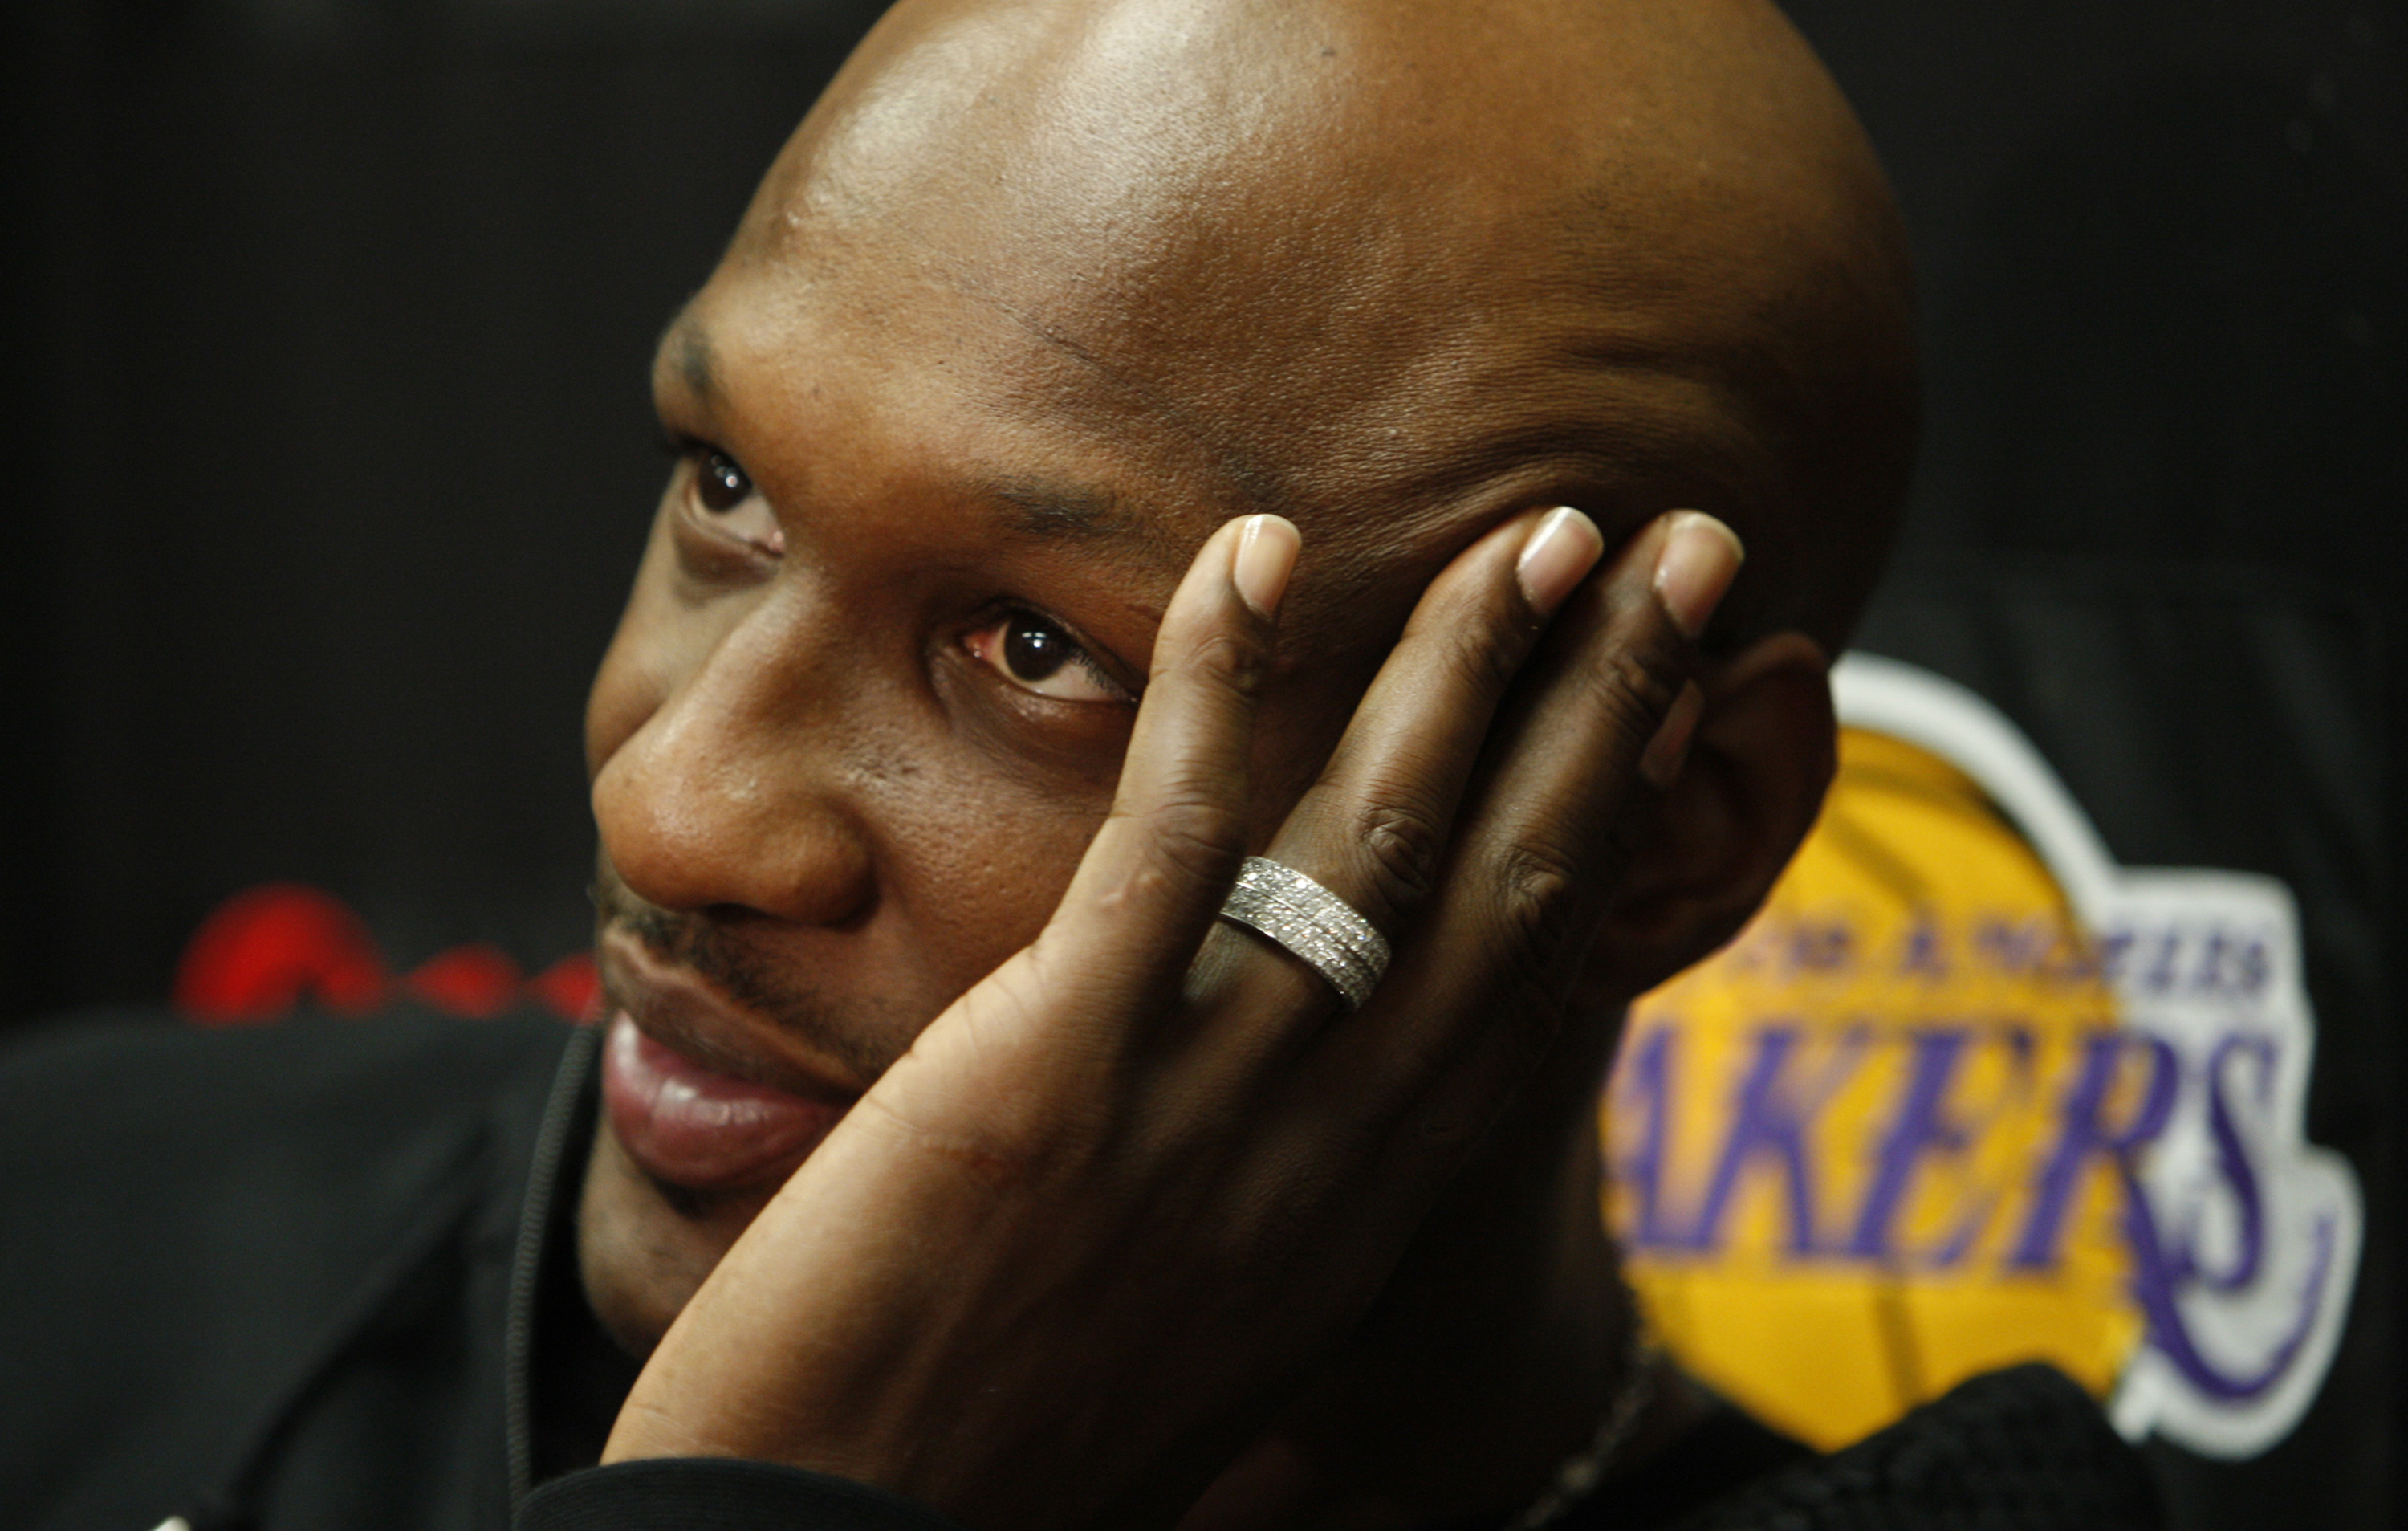 Lamar Odom is fighting for his life in hospital. Photo: TNS